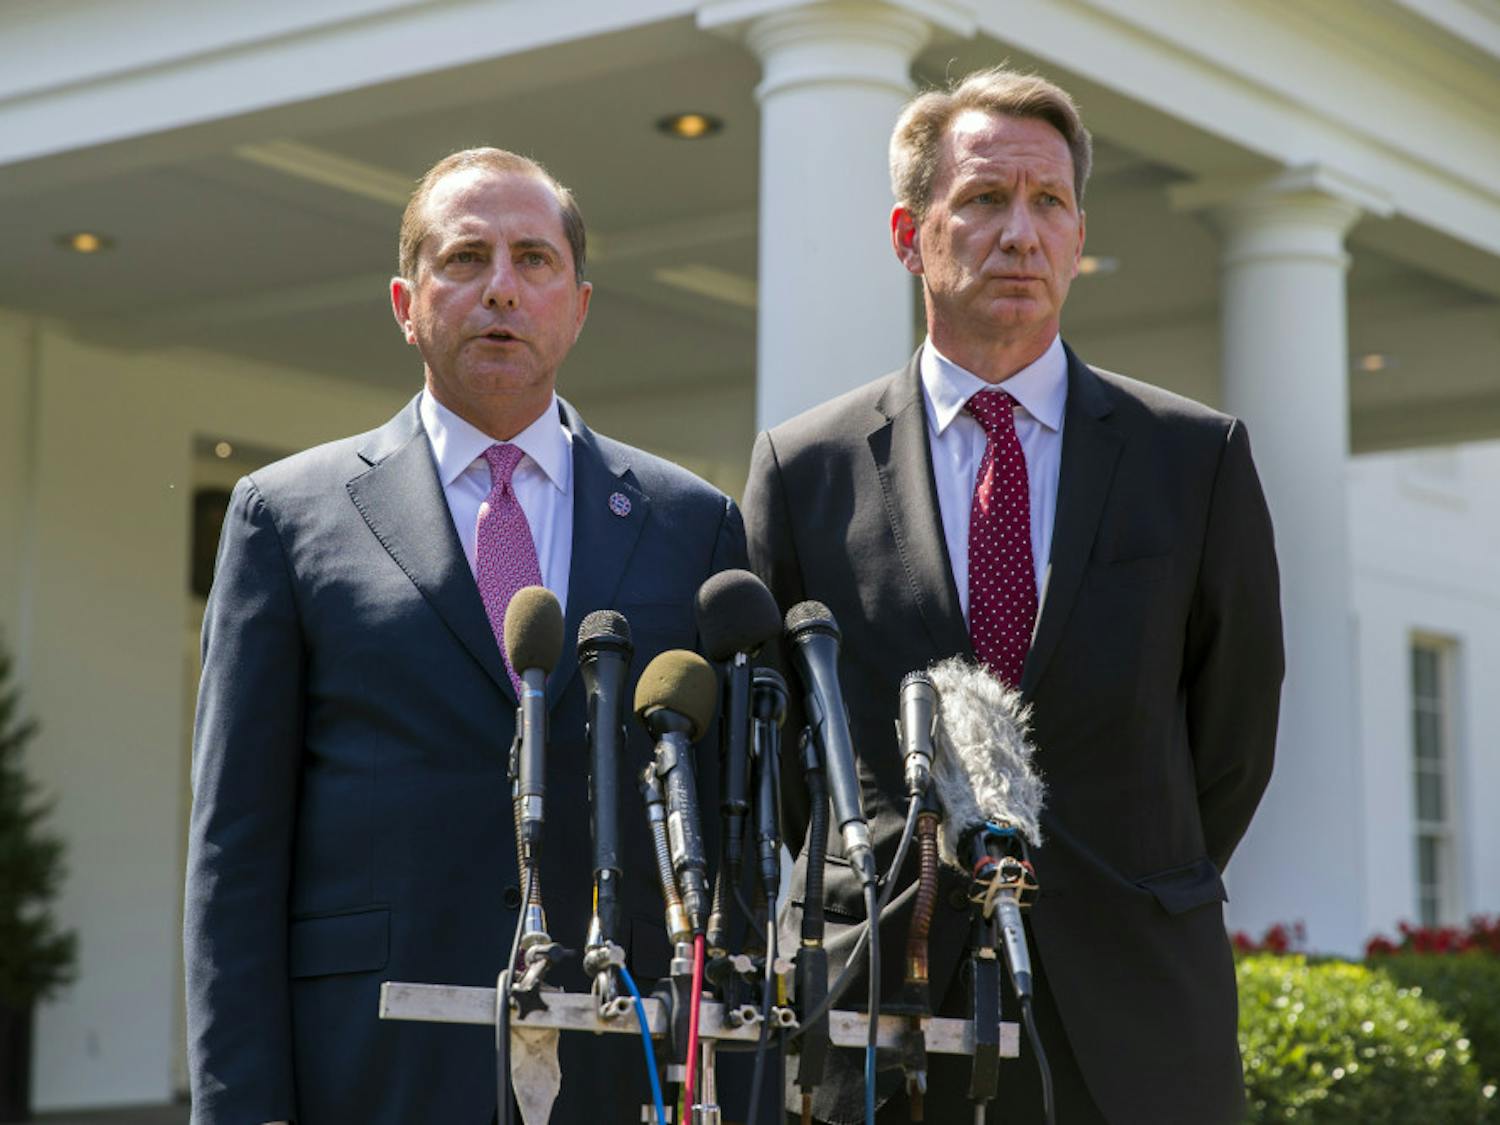 Health and Human Services Secretary Alex Azar, left, and acting FDA Commissioner Ned Sharpless speak with reporters after a meeting about vaping with President Donald Trump in the Oval Office of the White House, Wednesday, Sept. 11, 2019, in Washington. (AP Photo/Alex Brandon)